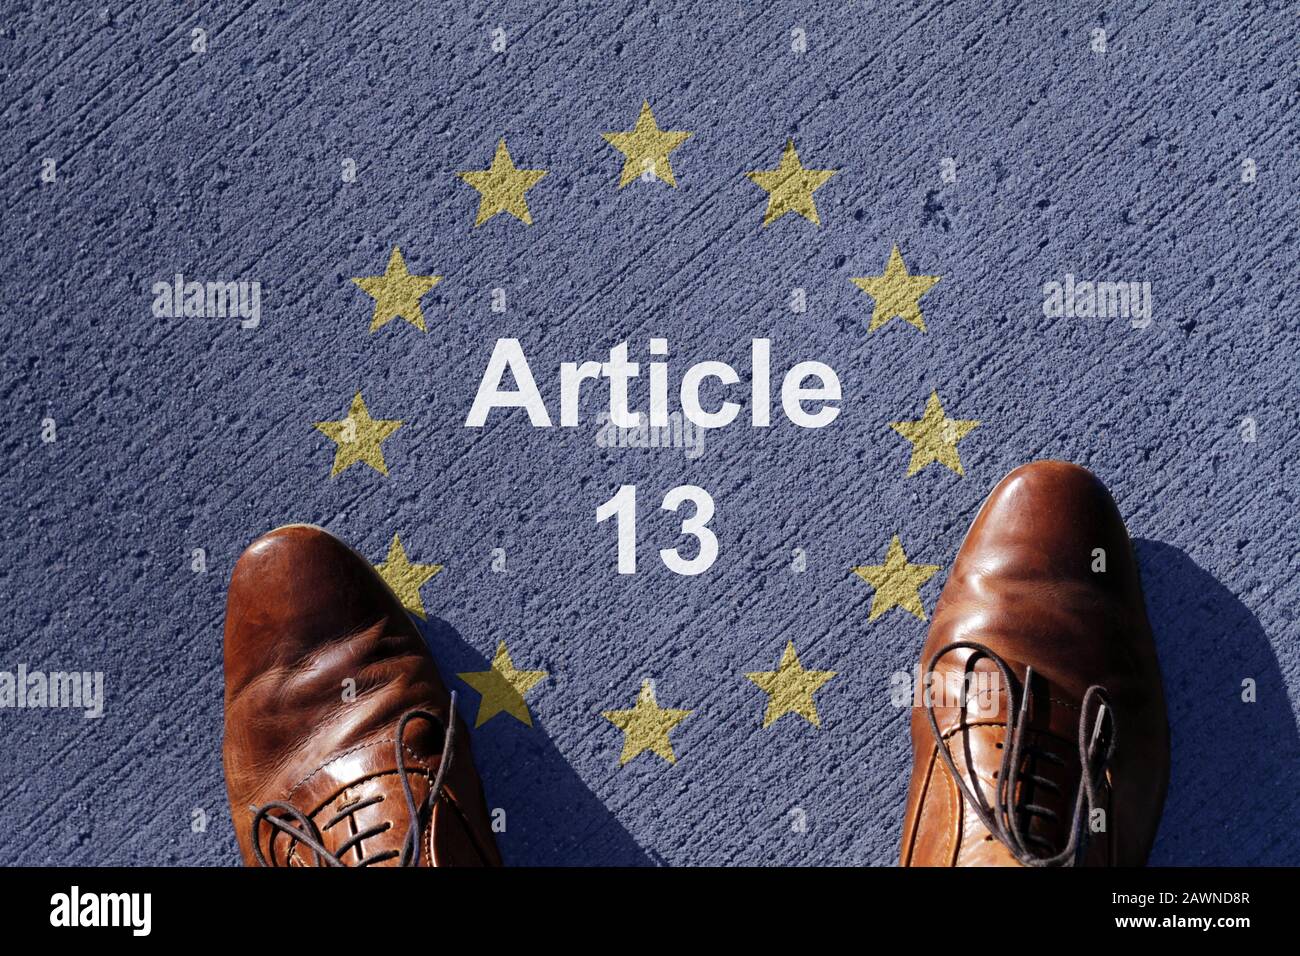 Man standing next to Article 13 written on the ground surrounded by the stars of the European Union Stock Photo